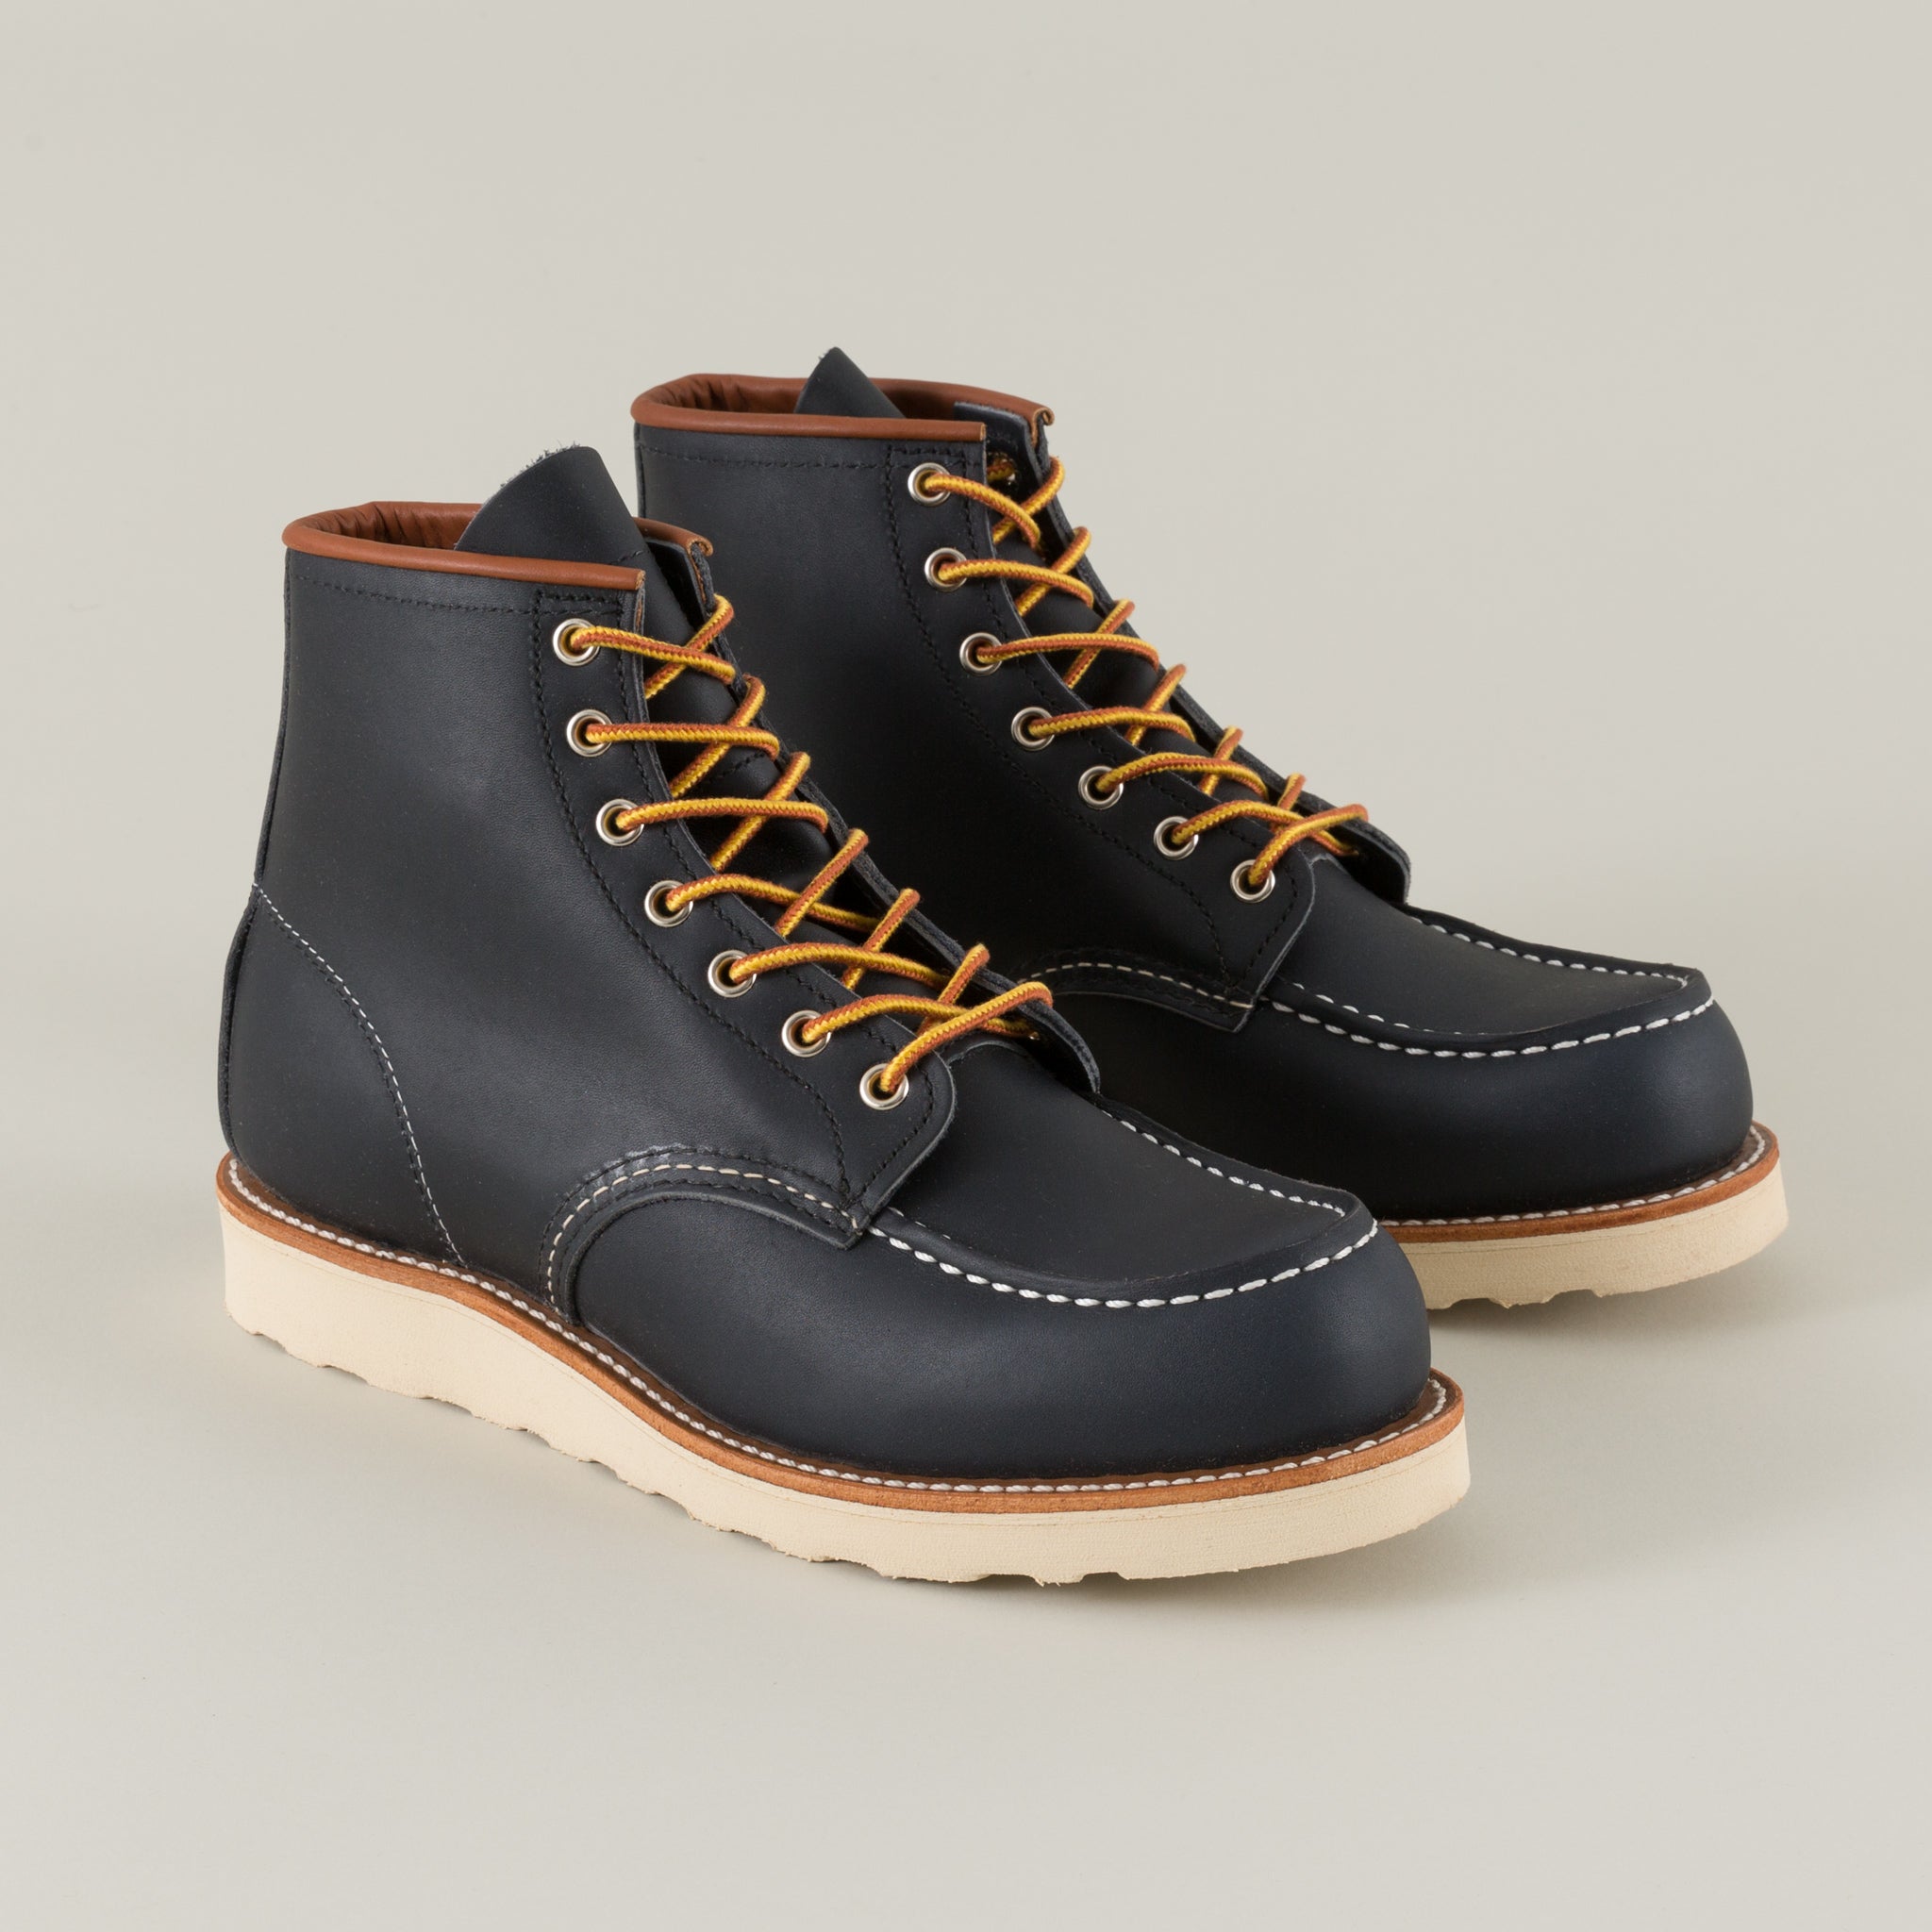 red wing moc toe navy